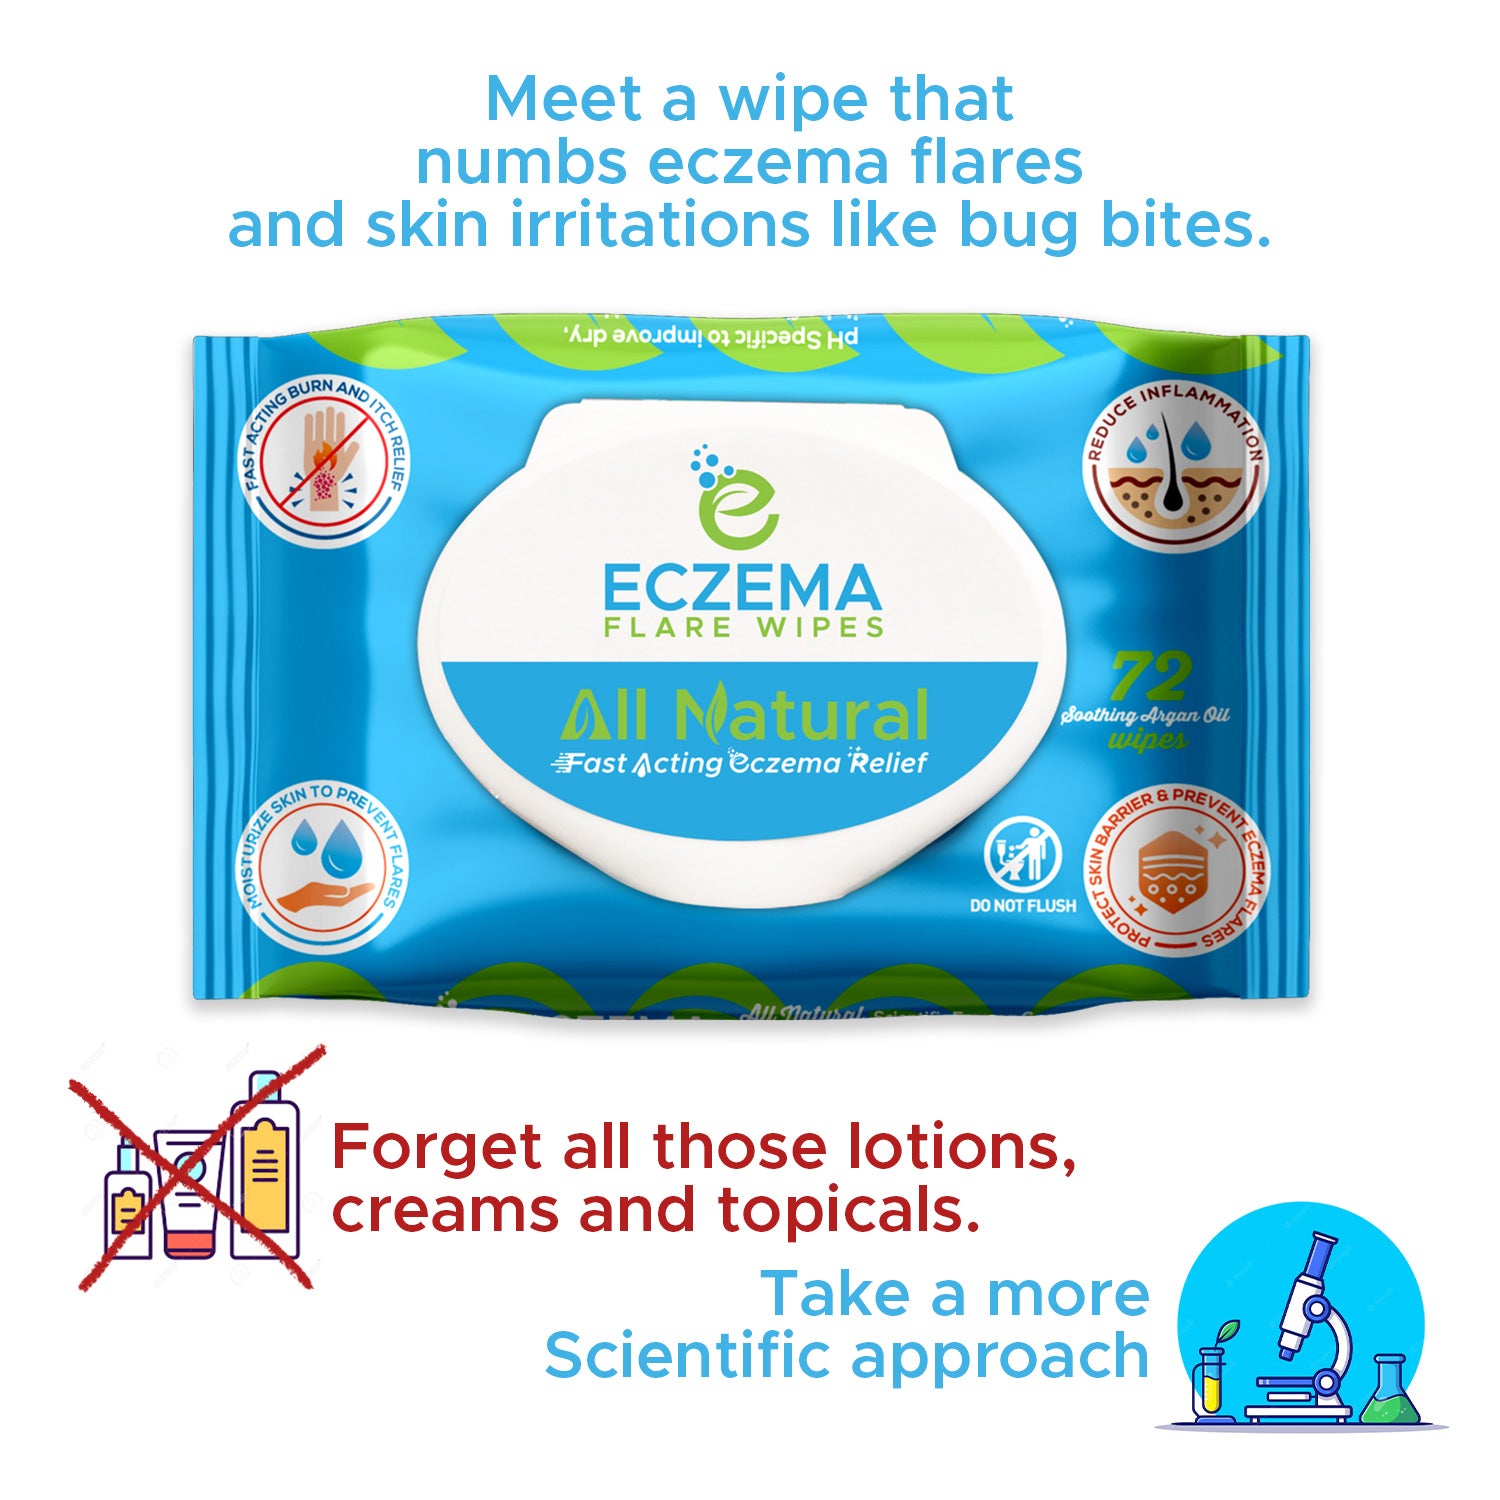 Meet a wipe that numbs eczema flares and skin irritations like bug bites. Forget all those lotions, creams and topicals. Take a more scientific approach